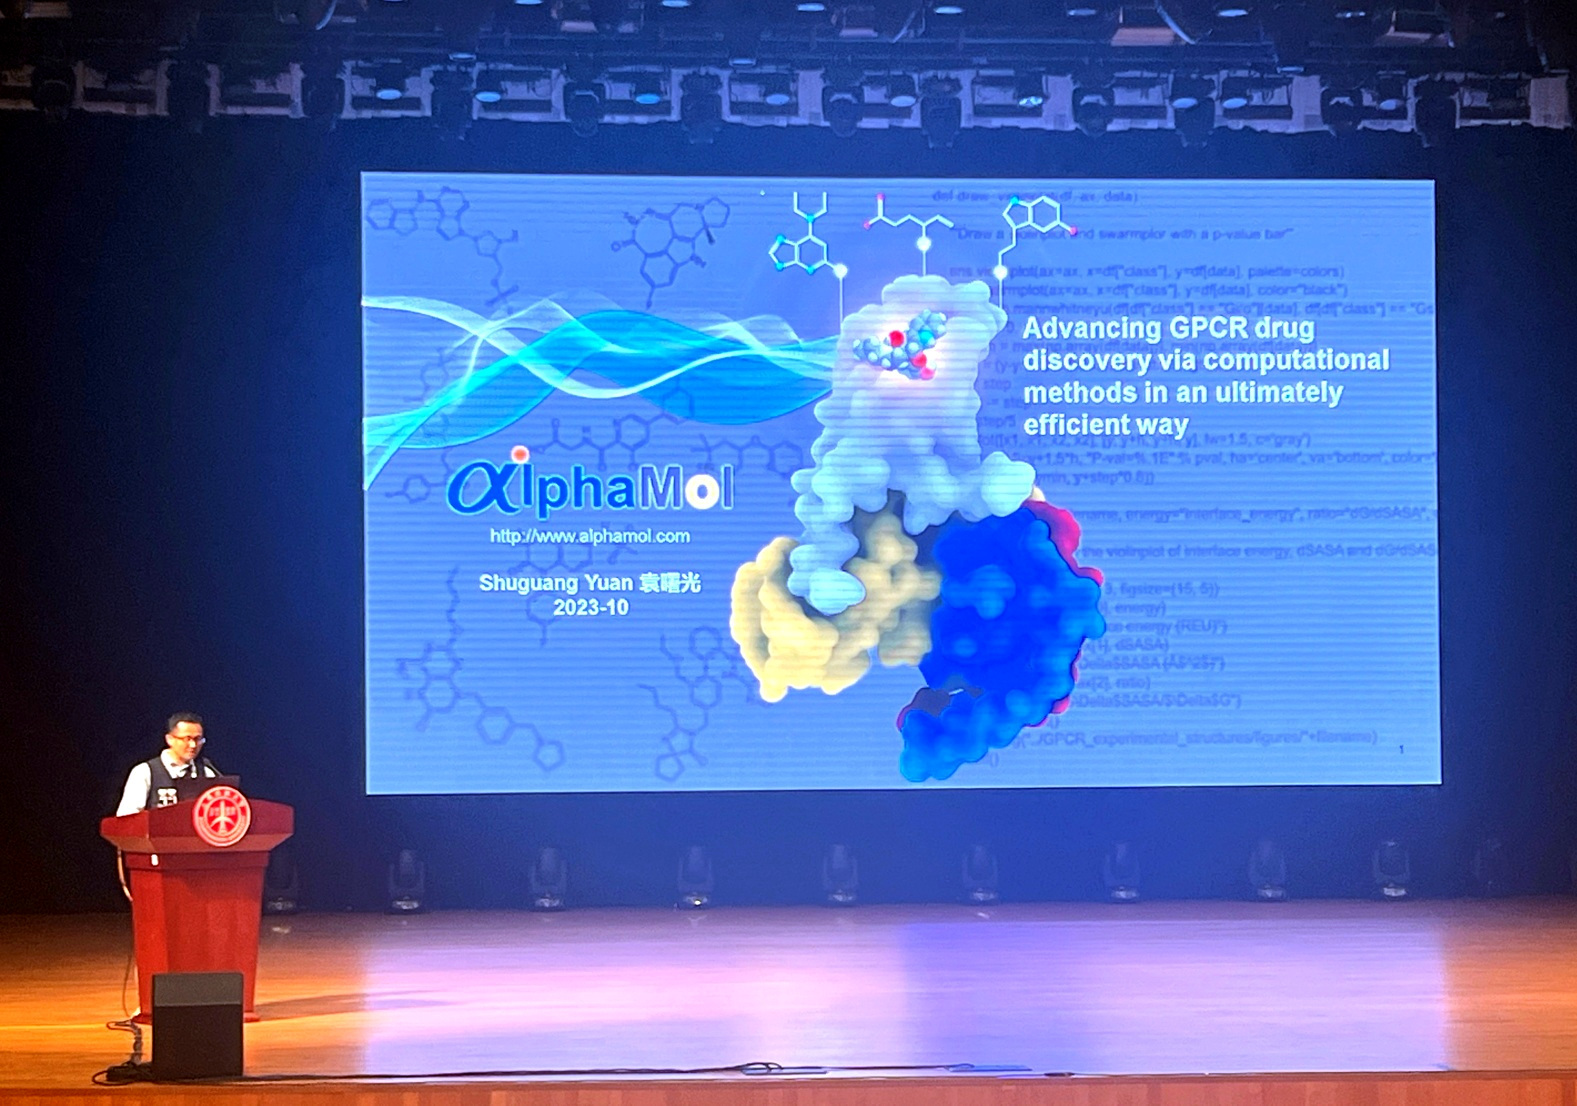 AlphaMol was invited to the 8th GPCR iHuman Forum to give a presentation